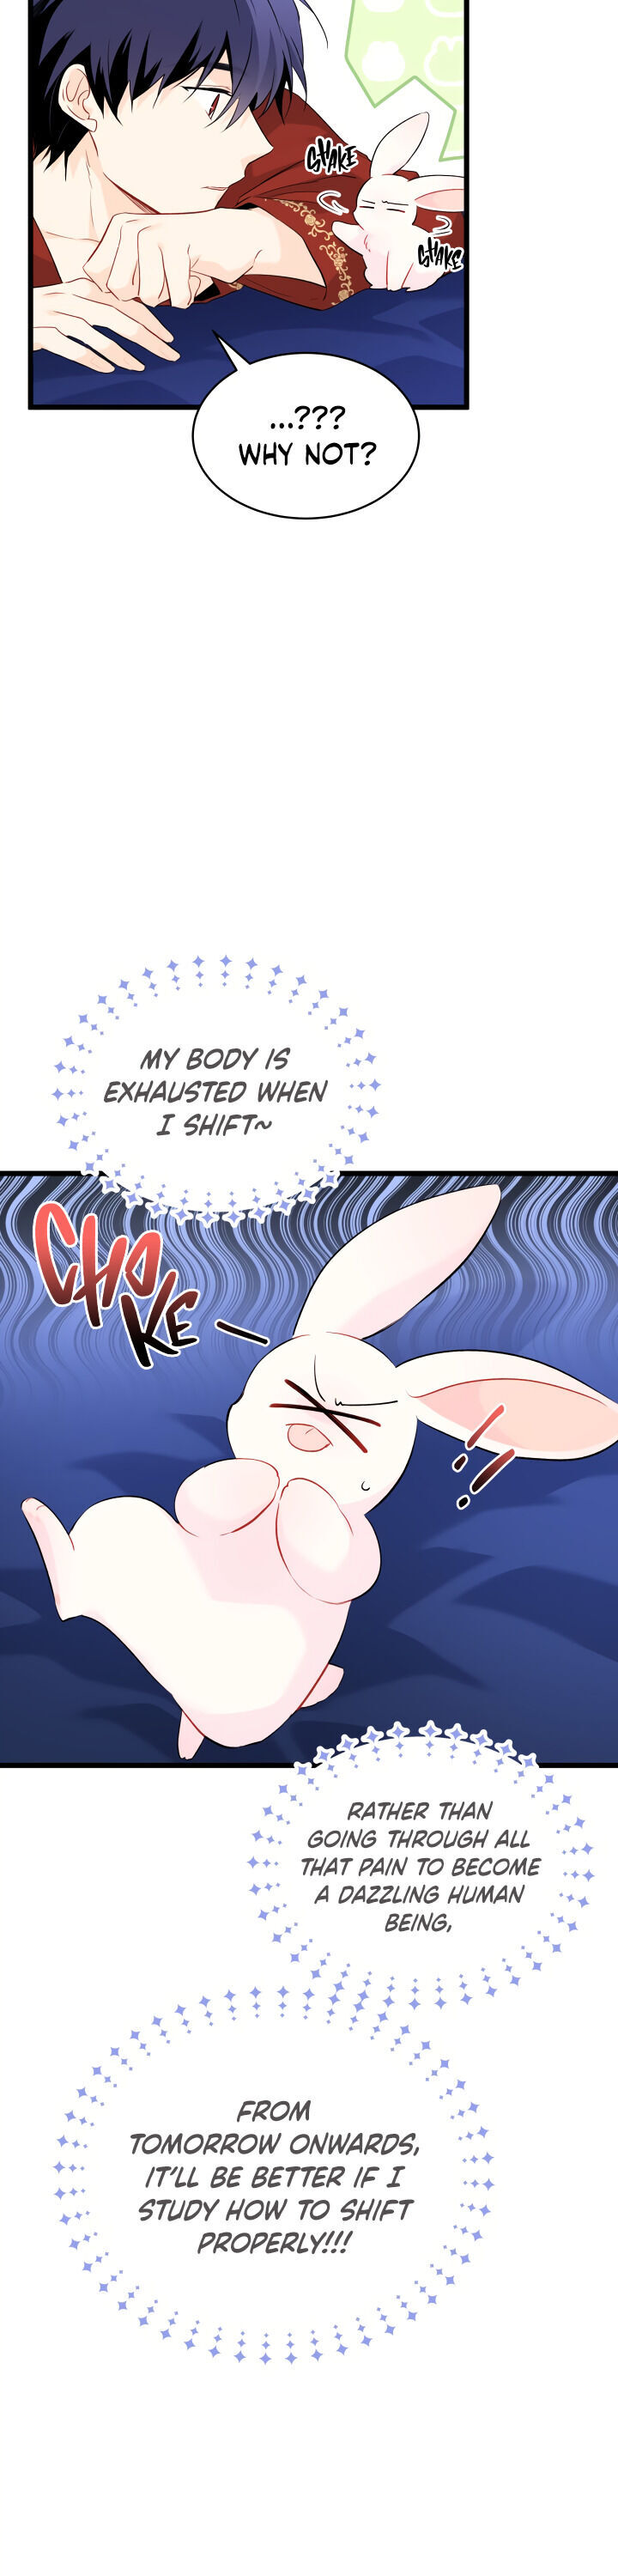 The Symbiotic Relationship Between A Rabbit and A Black Panther - Chapter 46 Page 31